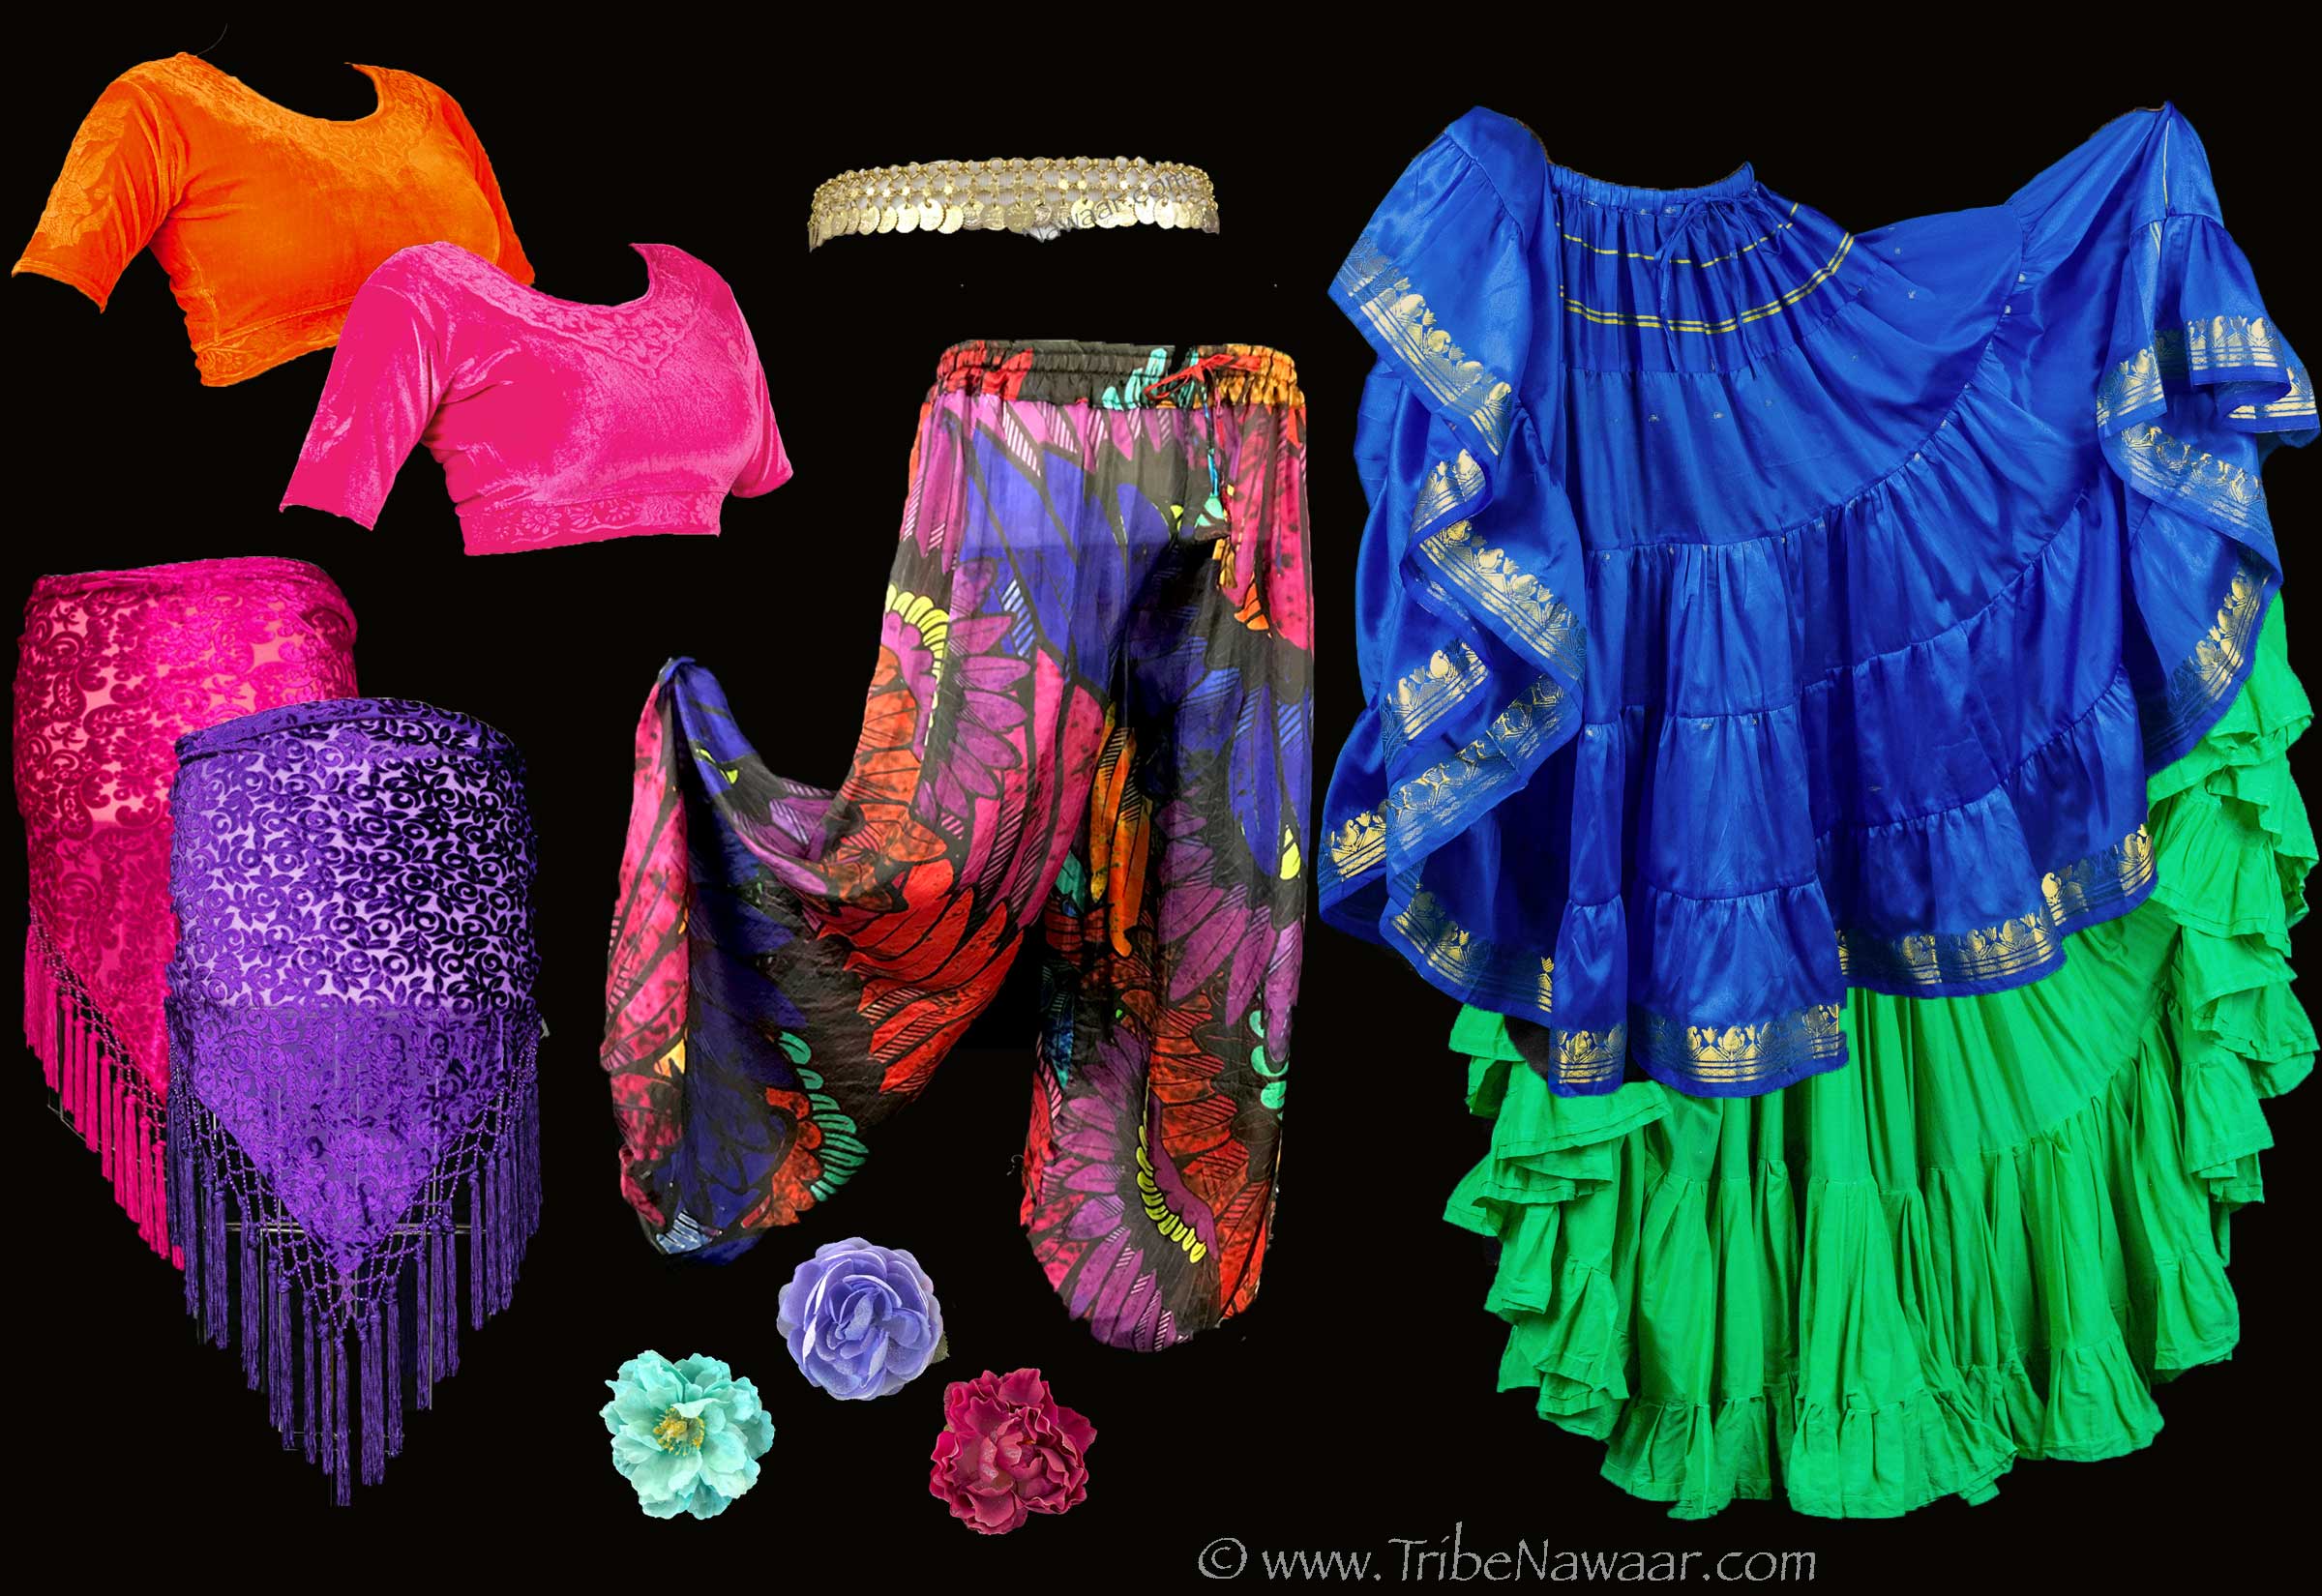 Summer 2022 costuming combo from The Nawaar Marketplace- all belly dance costuming and accessories available at www.TribeNawaar.com